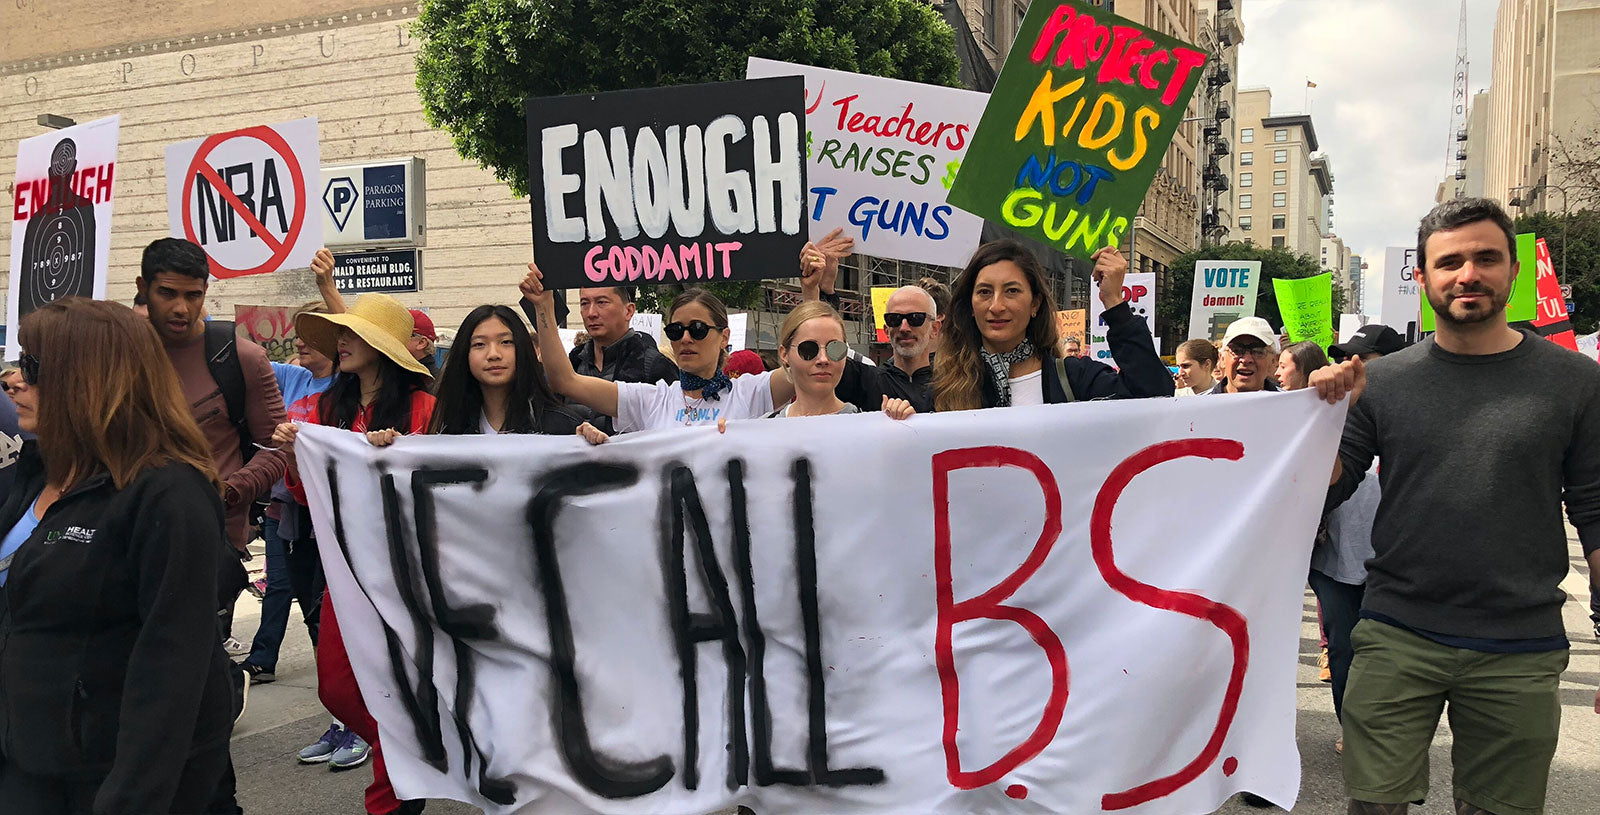 EVENT: March For Our Lives - SIGN MAKING